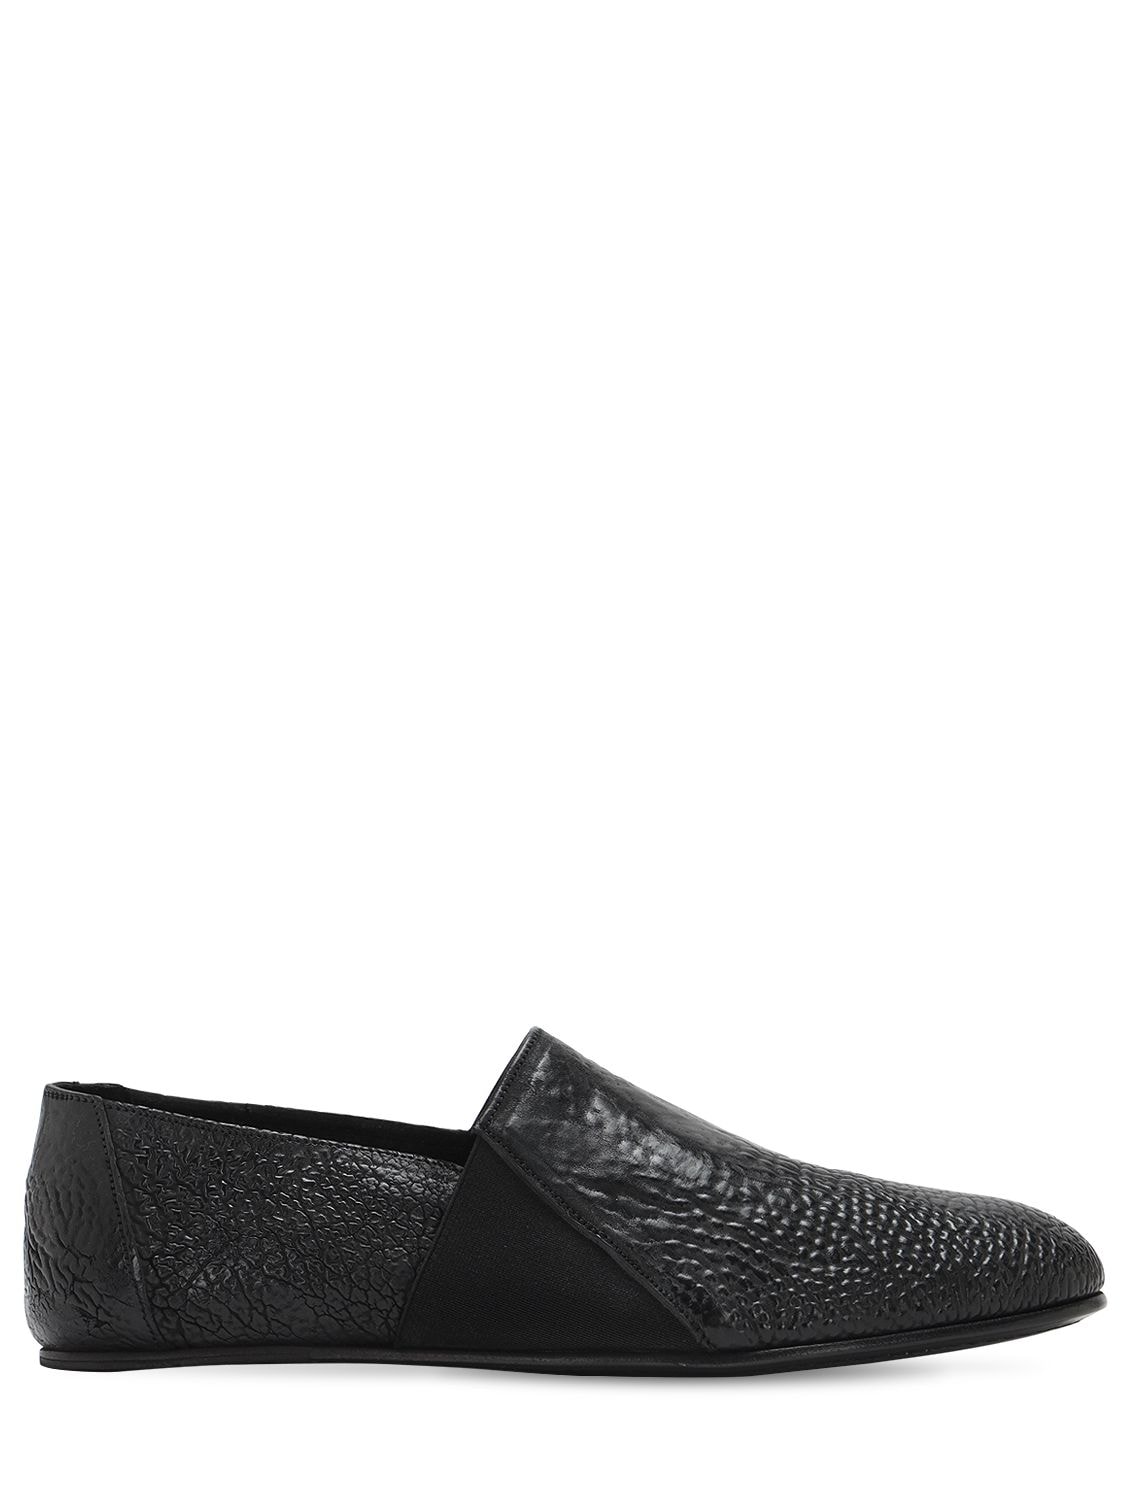 Lauf Waxed Leather Loafers